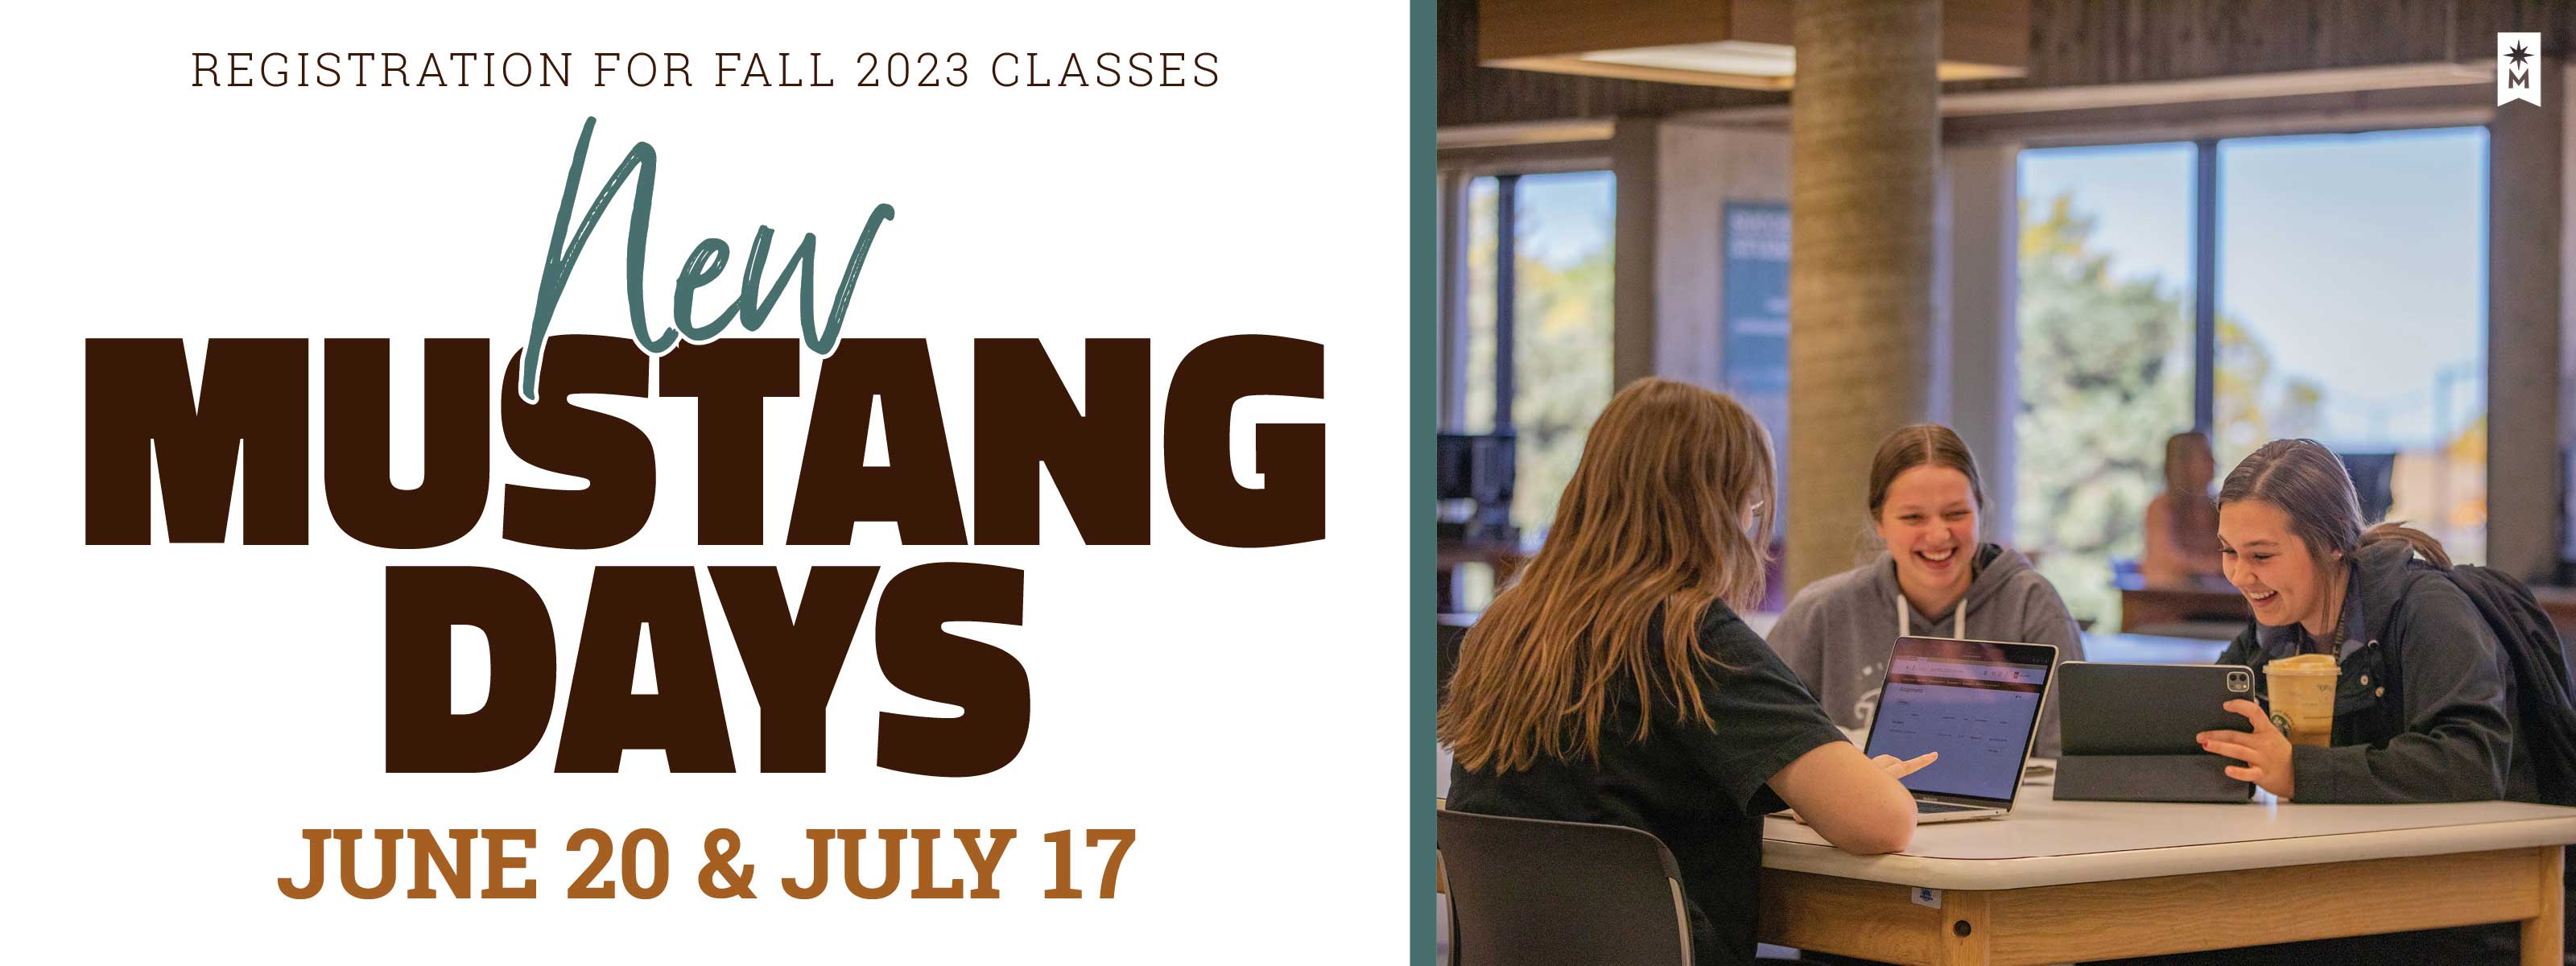 Registration for Fall 2023 Classes - New Mustang Days - June 20 and July 17 - Click to RSVP!